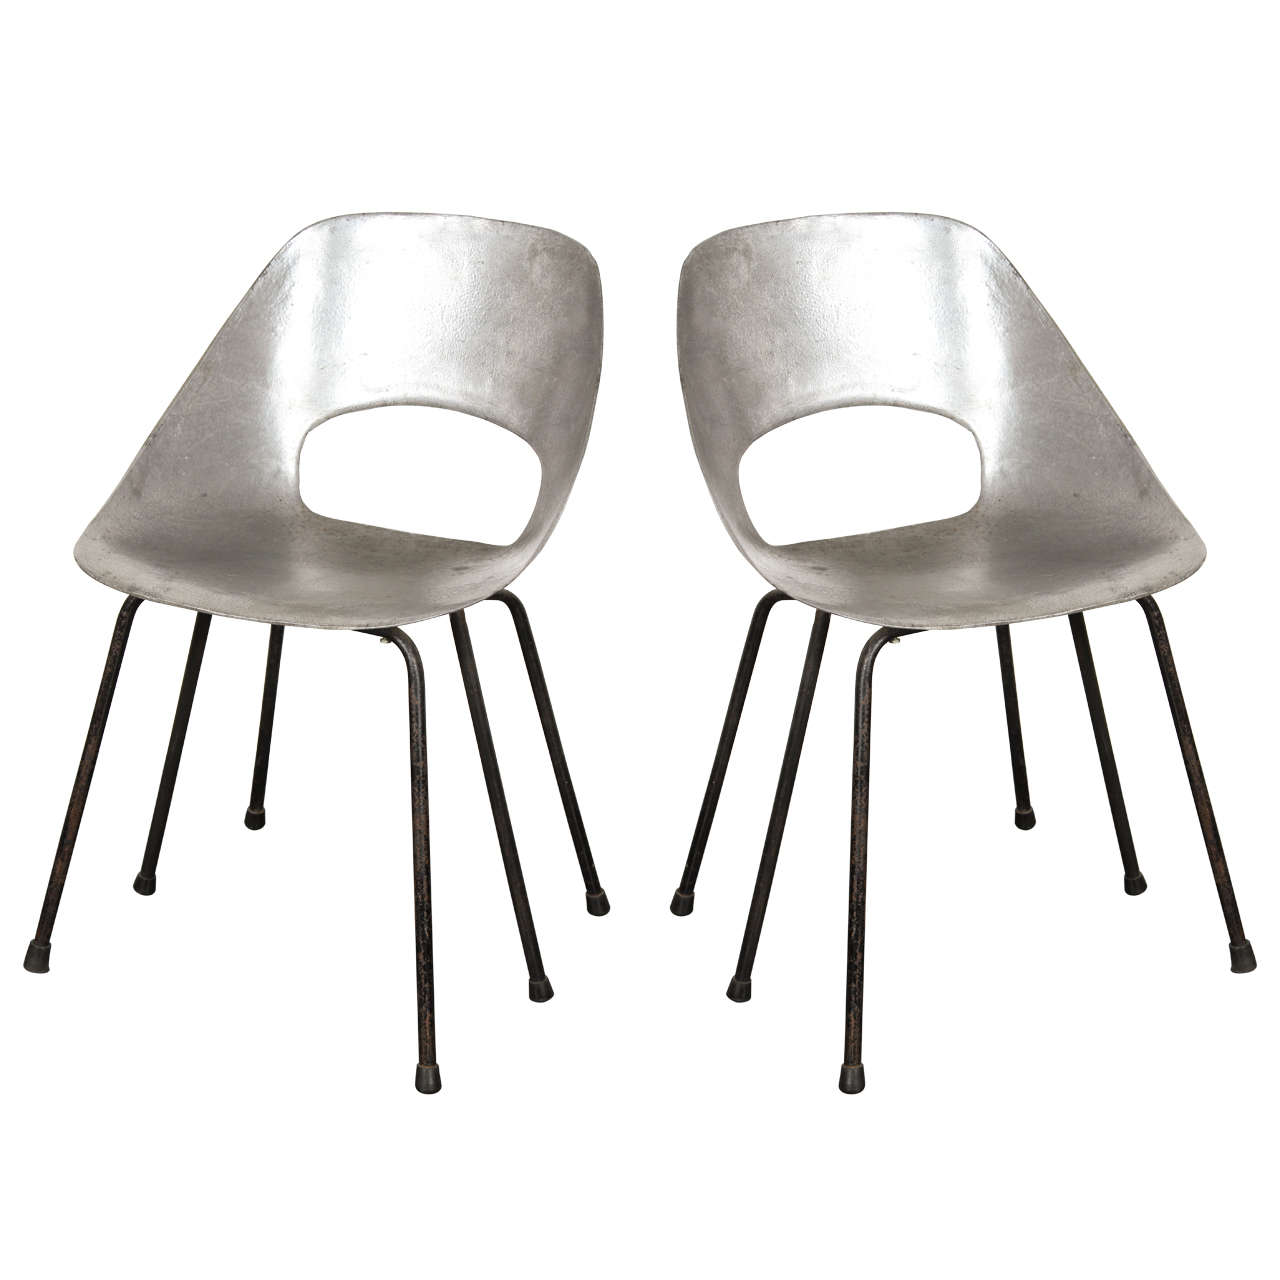 Pierre Guariche Prototype Chairs For Sale